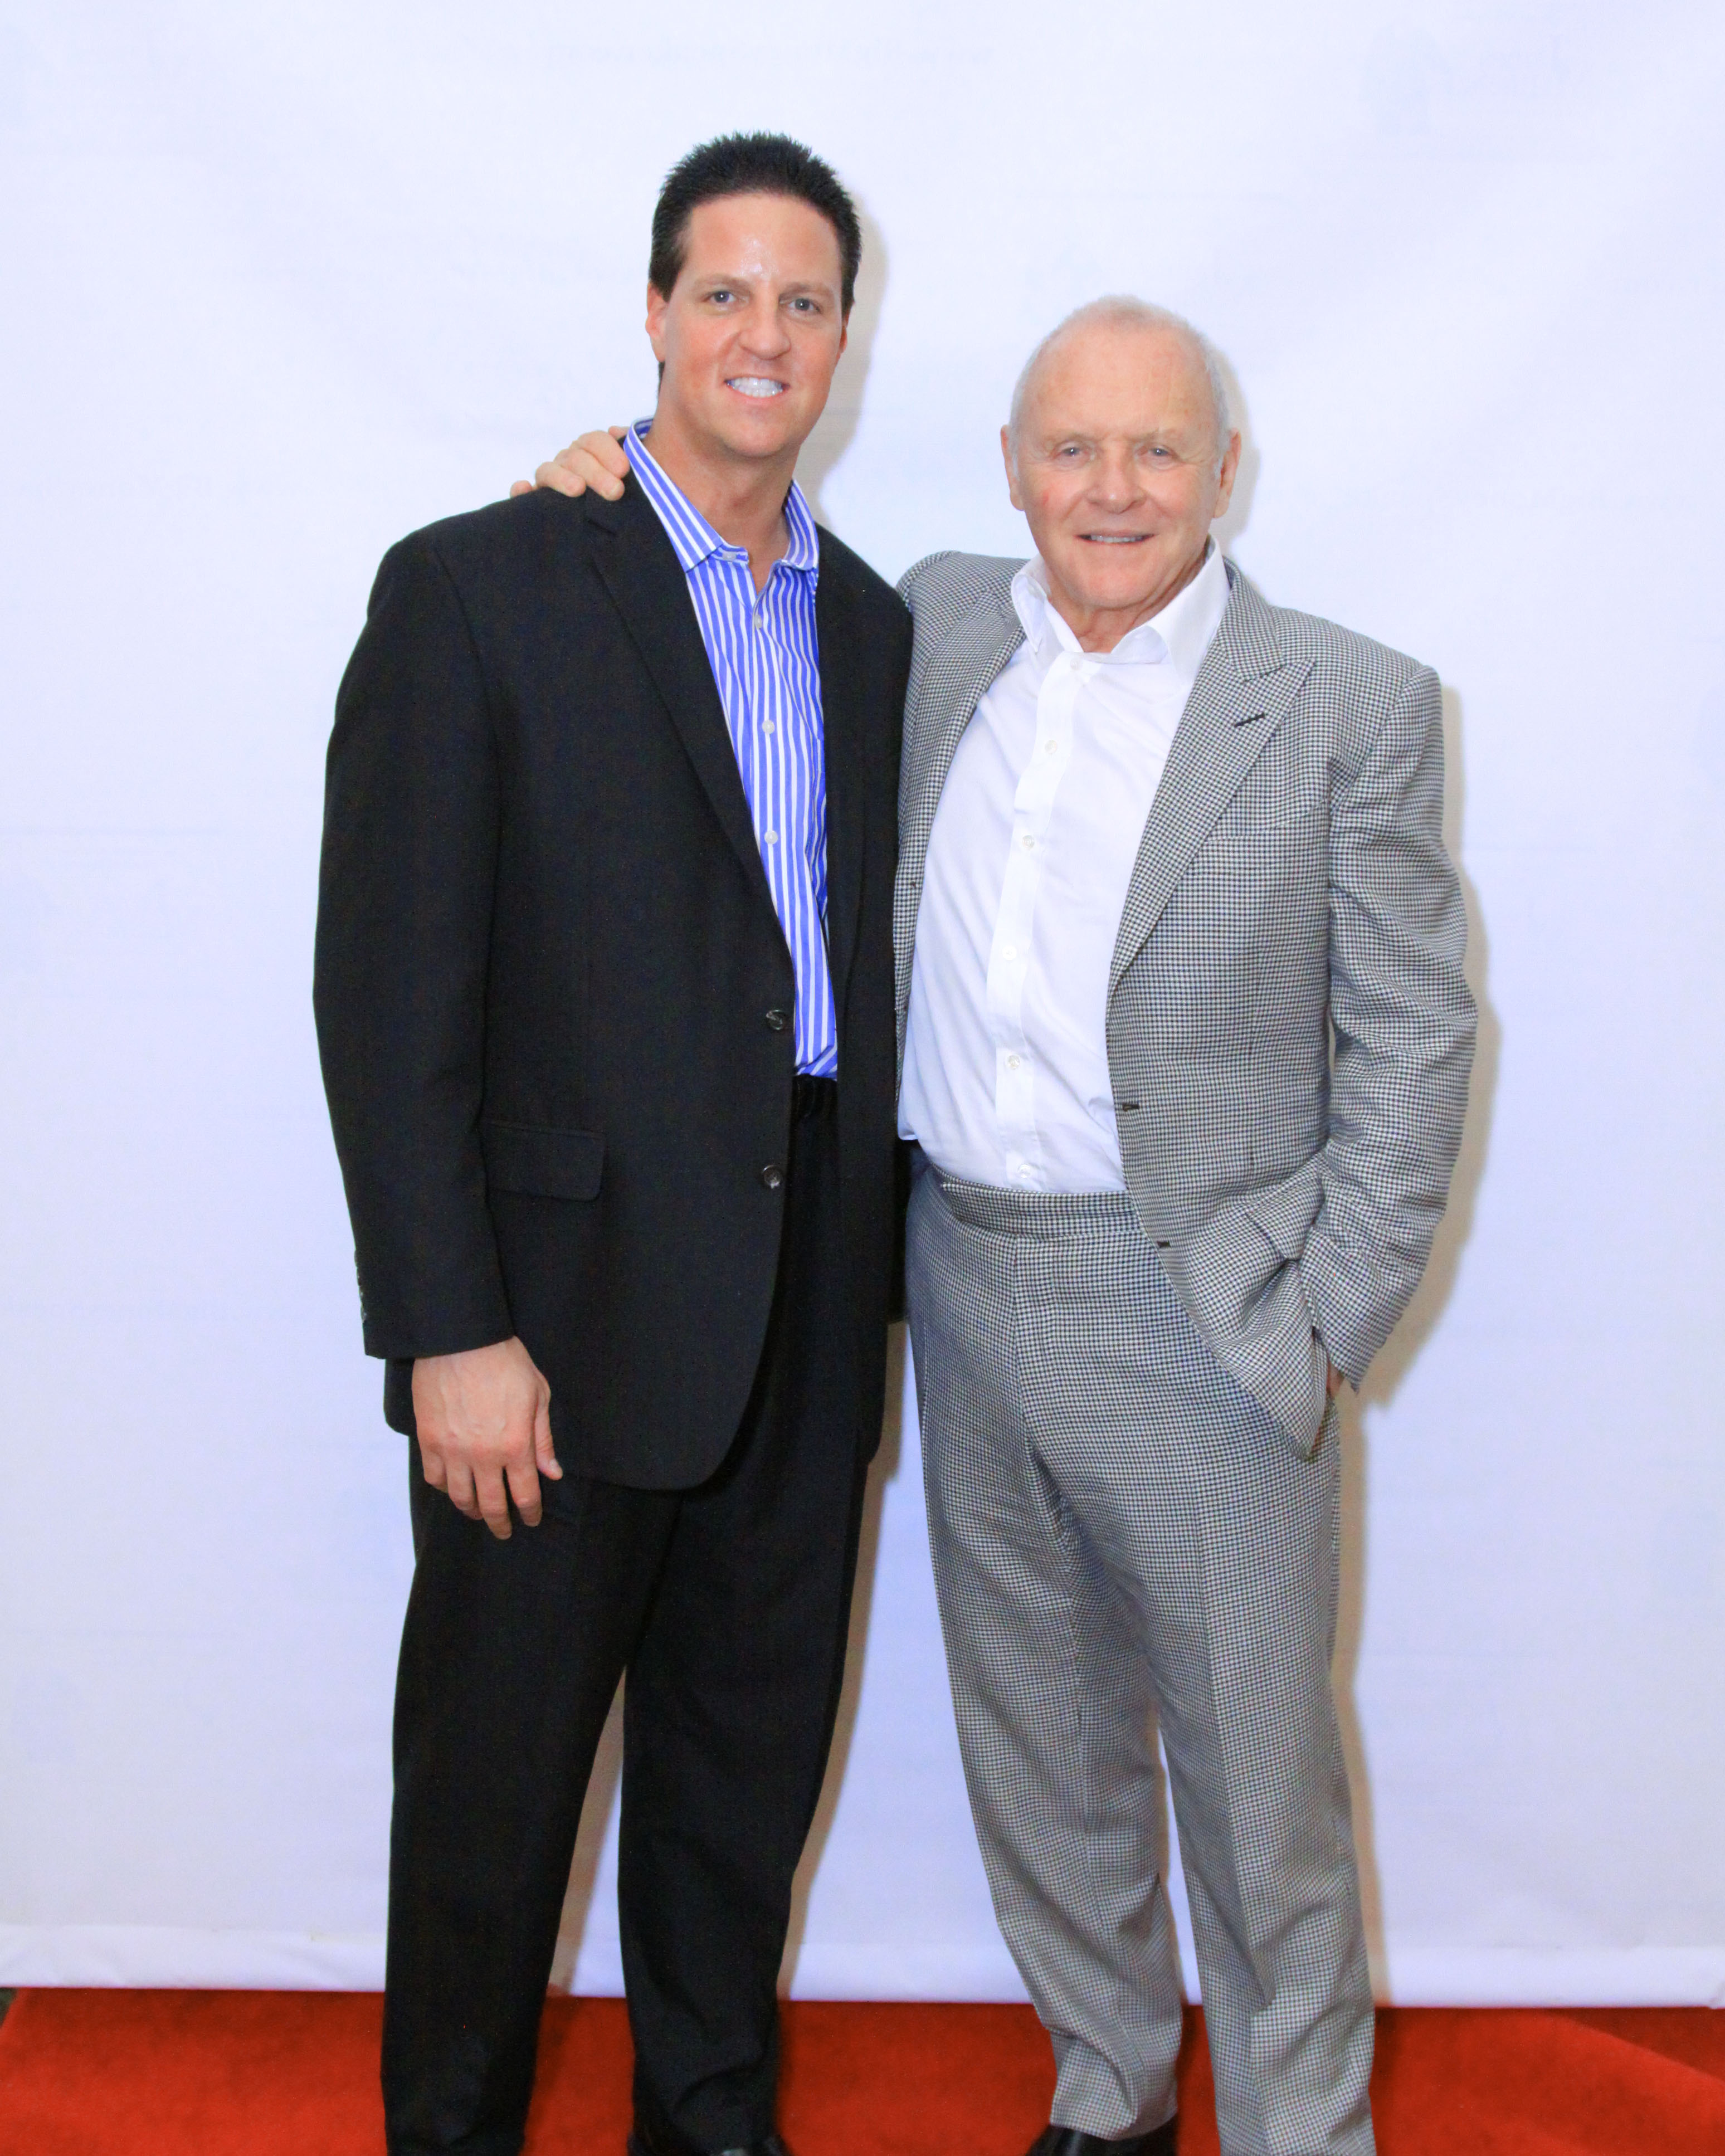 Academy Award Winning Actor Anthony Hopkins at James Malinchak's Big Money Speaker Boot Camp. James Malinchak, Featured on ABC's Hit TV Show, Secret Millionaire. James Malinchak is one of America's highest-paid, most in-demand speakers.